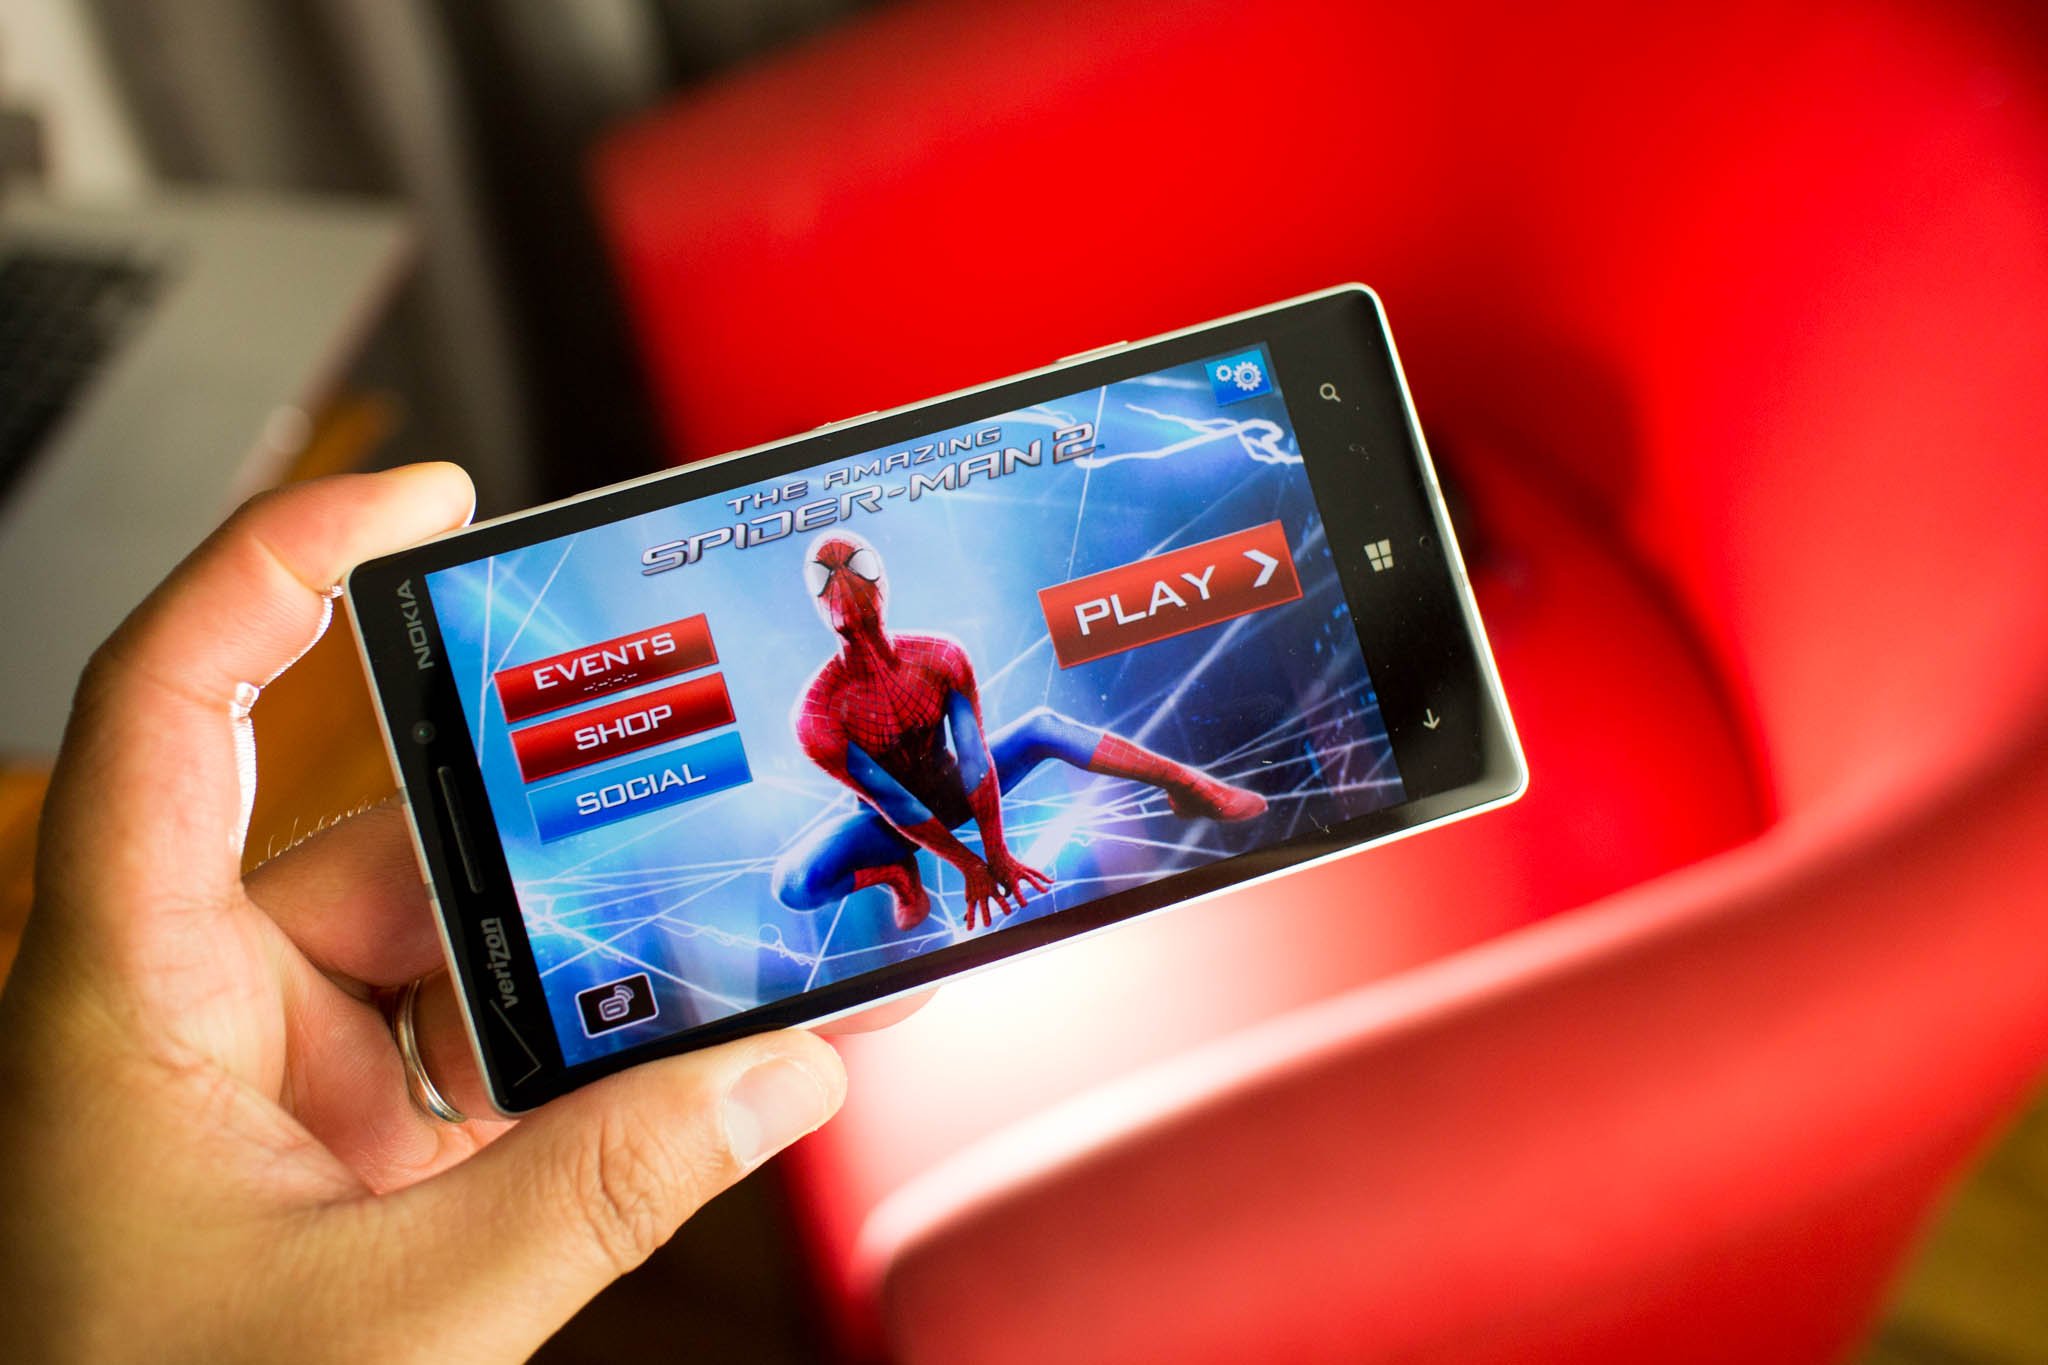 Get Inside The Amazing Spider-Man 2 - Microsoft Store